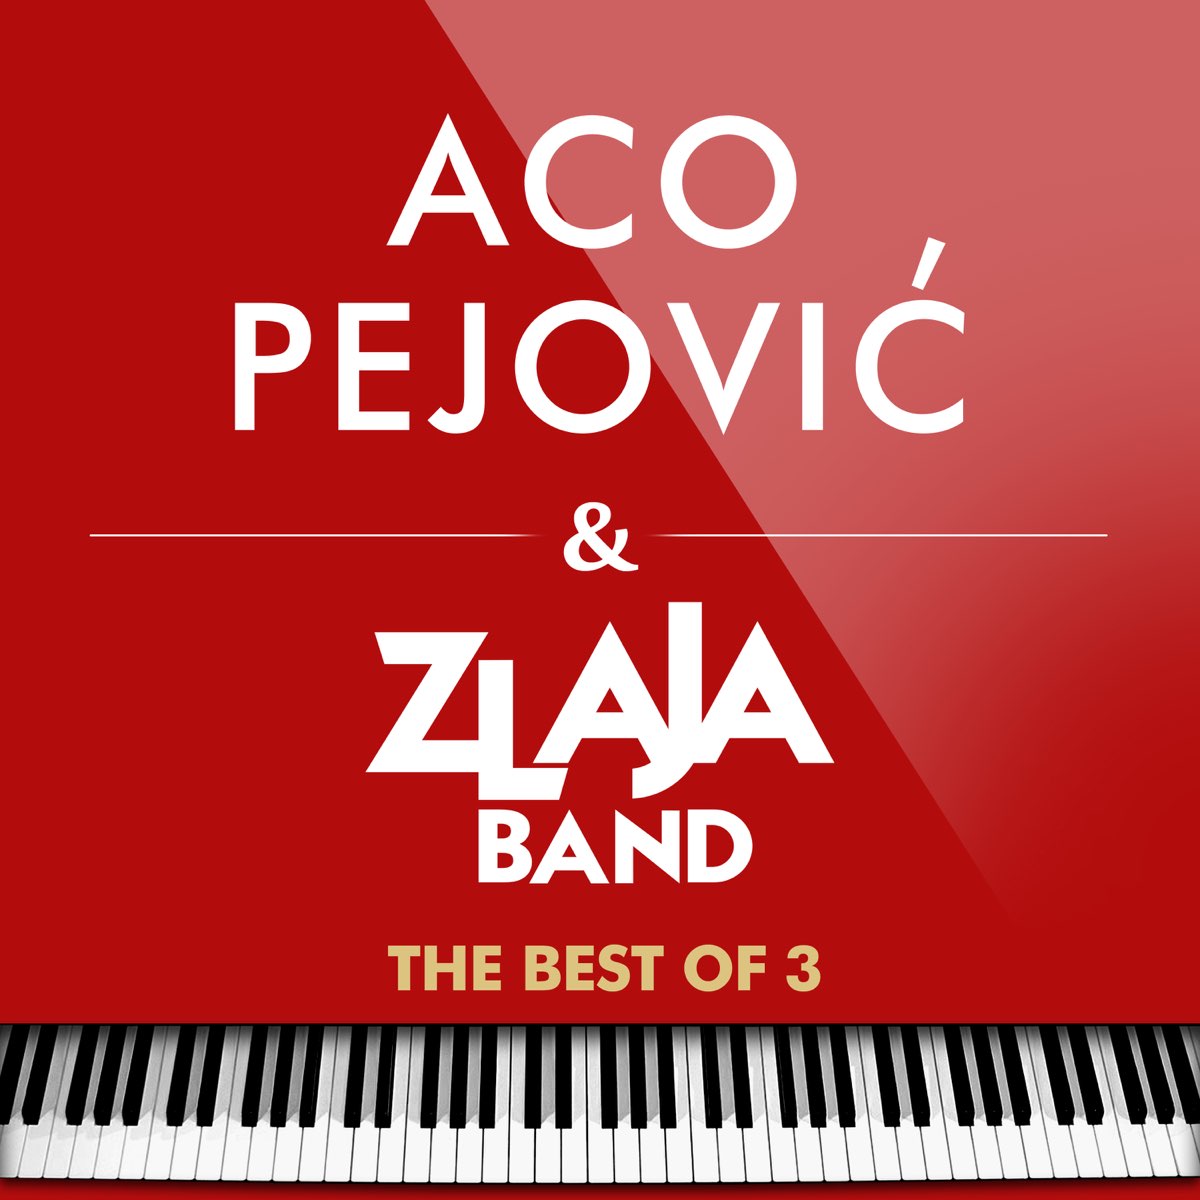 ‎The Best Of 3 by Aco Pejovic & Zlaja Band on Apple Music